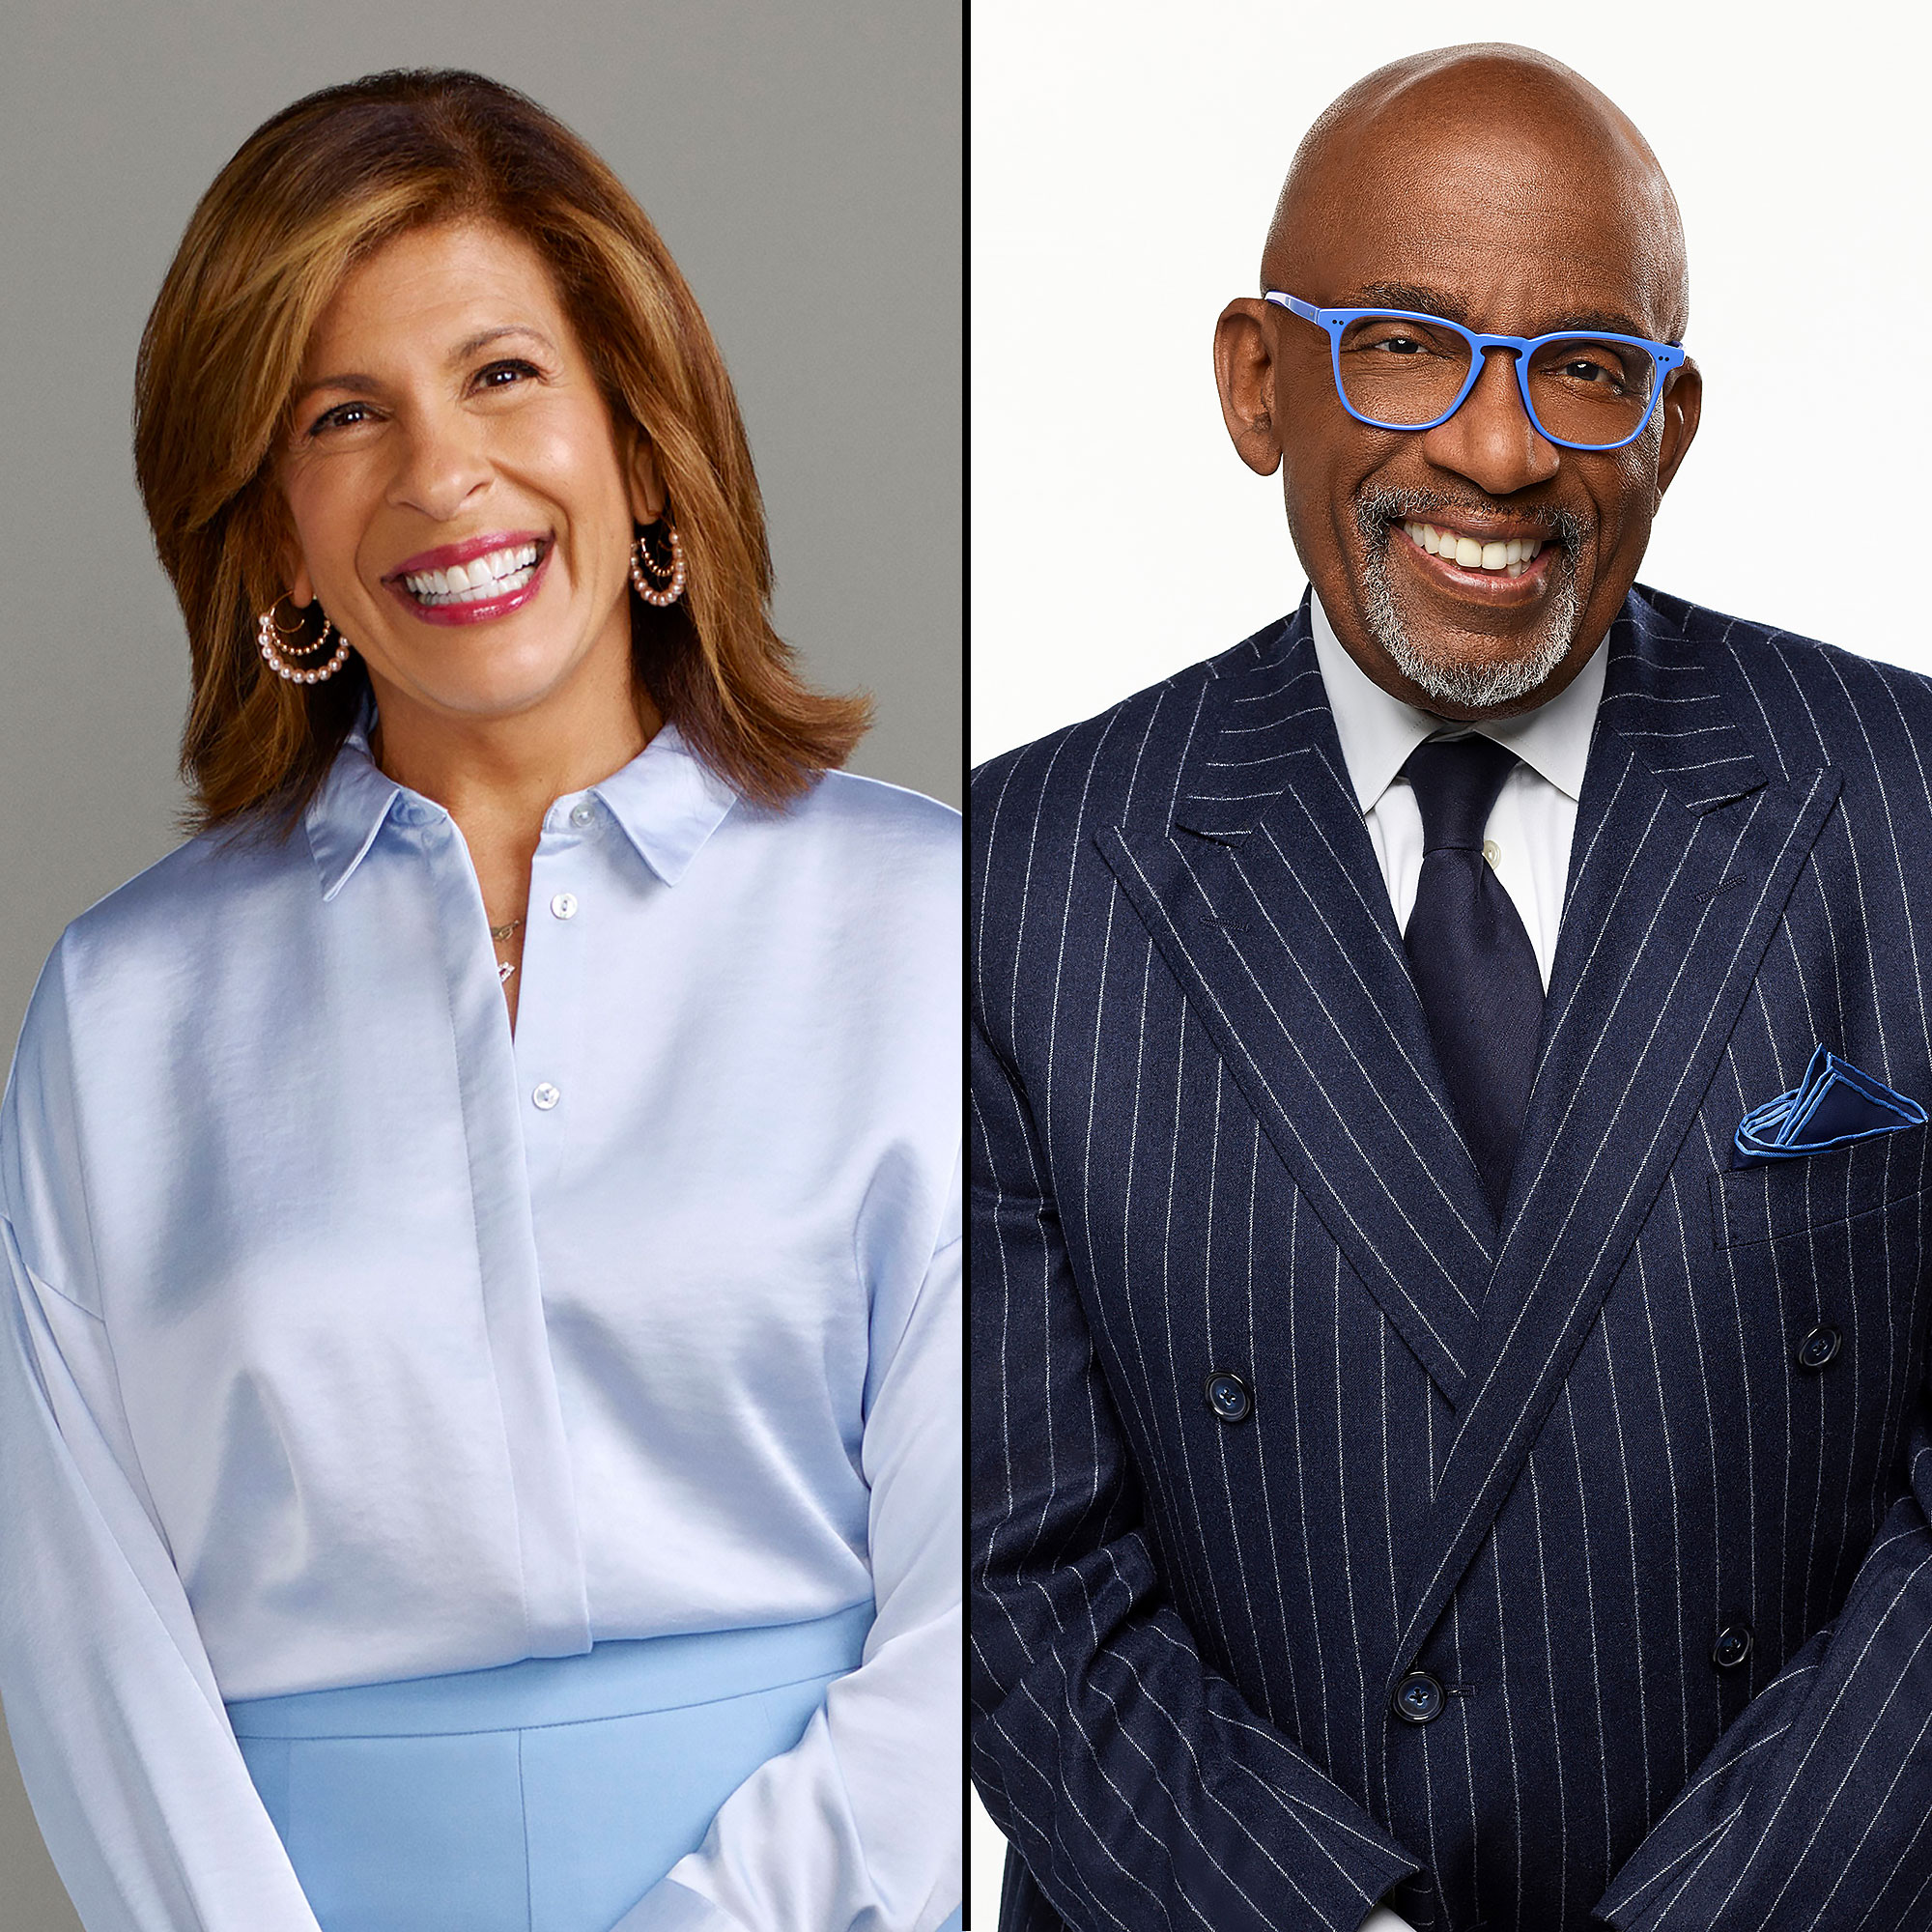 Hoda Kotb, Al Roker and More Hosts Absent From ‘As of late’ Gift